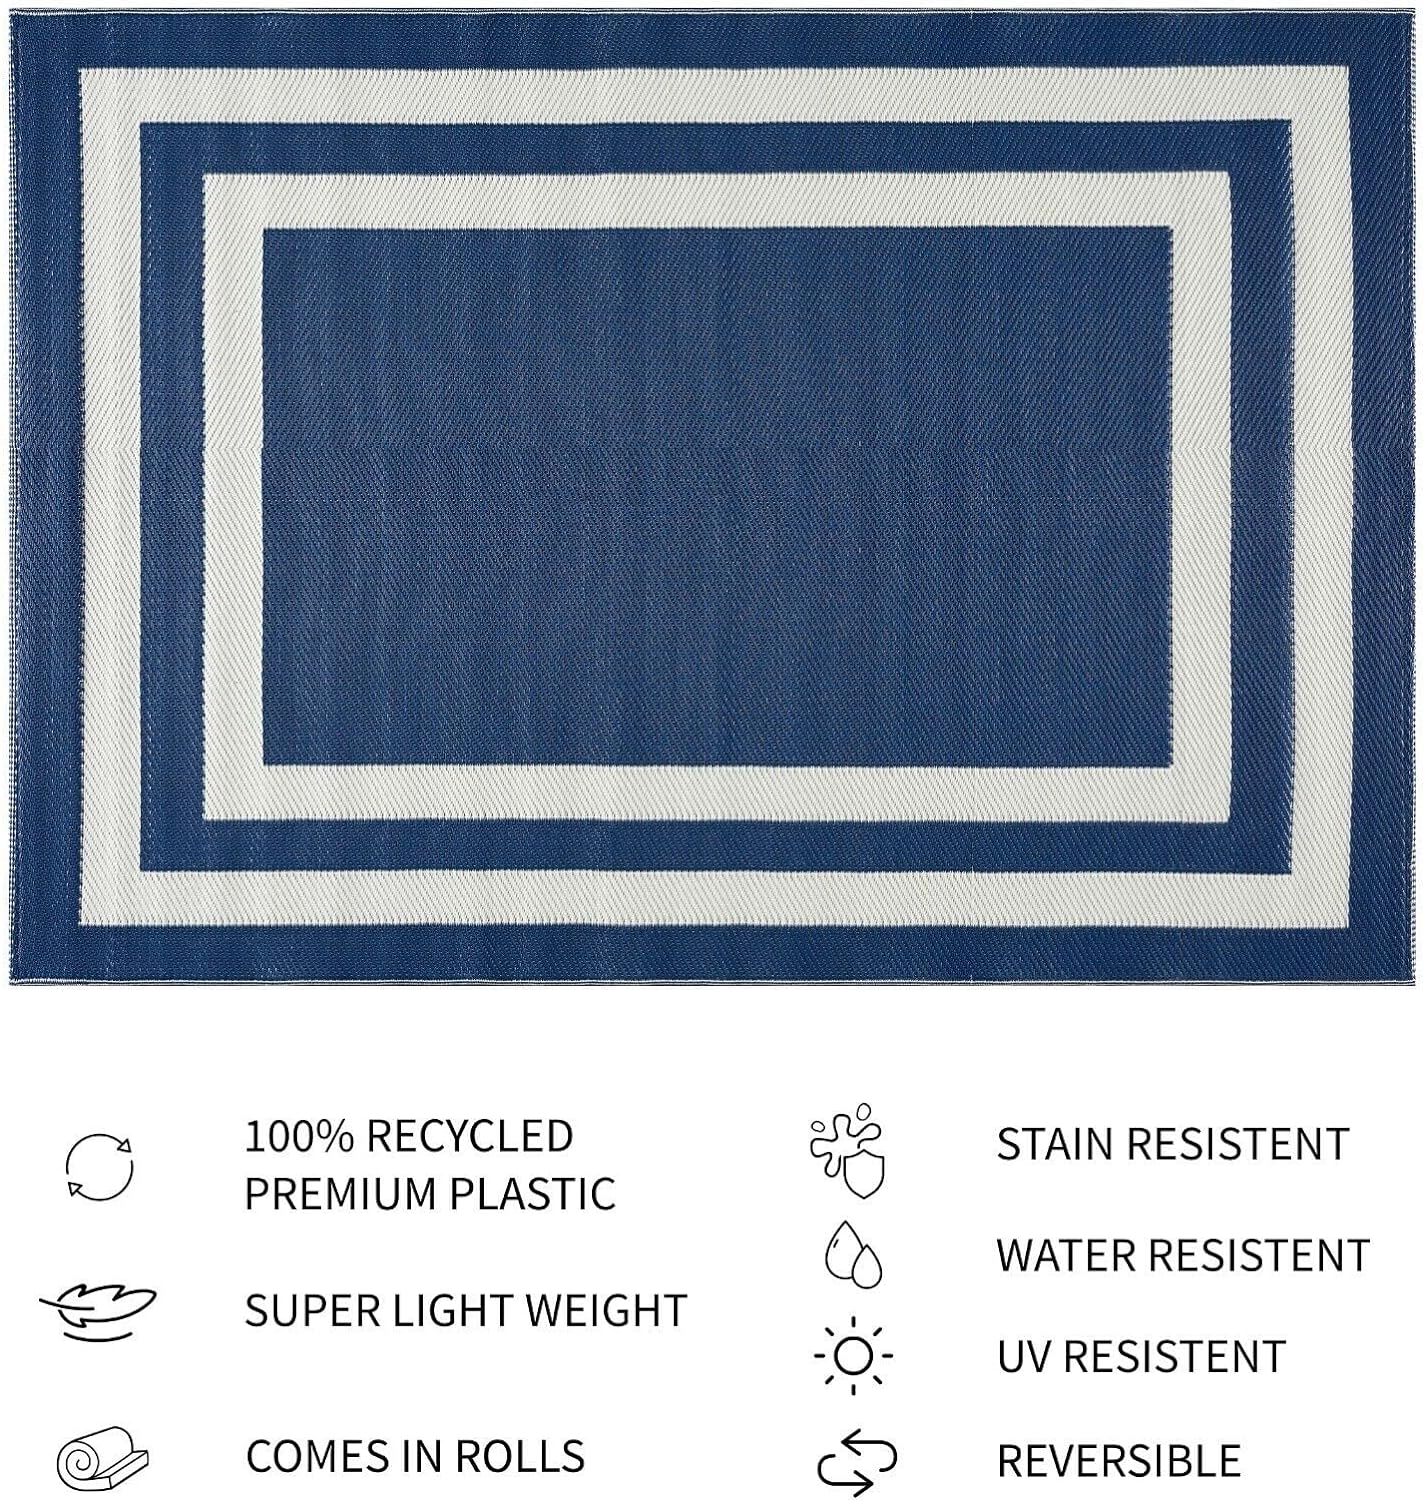 Playa Outdoor Rug - Crease-Free Recycled Plastic Floor Mat for Patio, Camping, Beach, Balcony, Porch, Deck - Weather, Water, Stain, Lightweight, Fade and UV Resistant - Paris- Navy & Creme